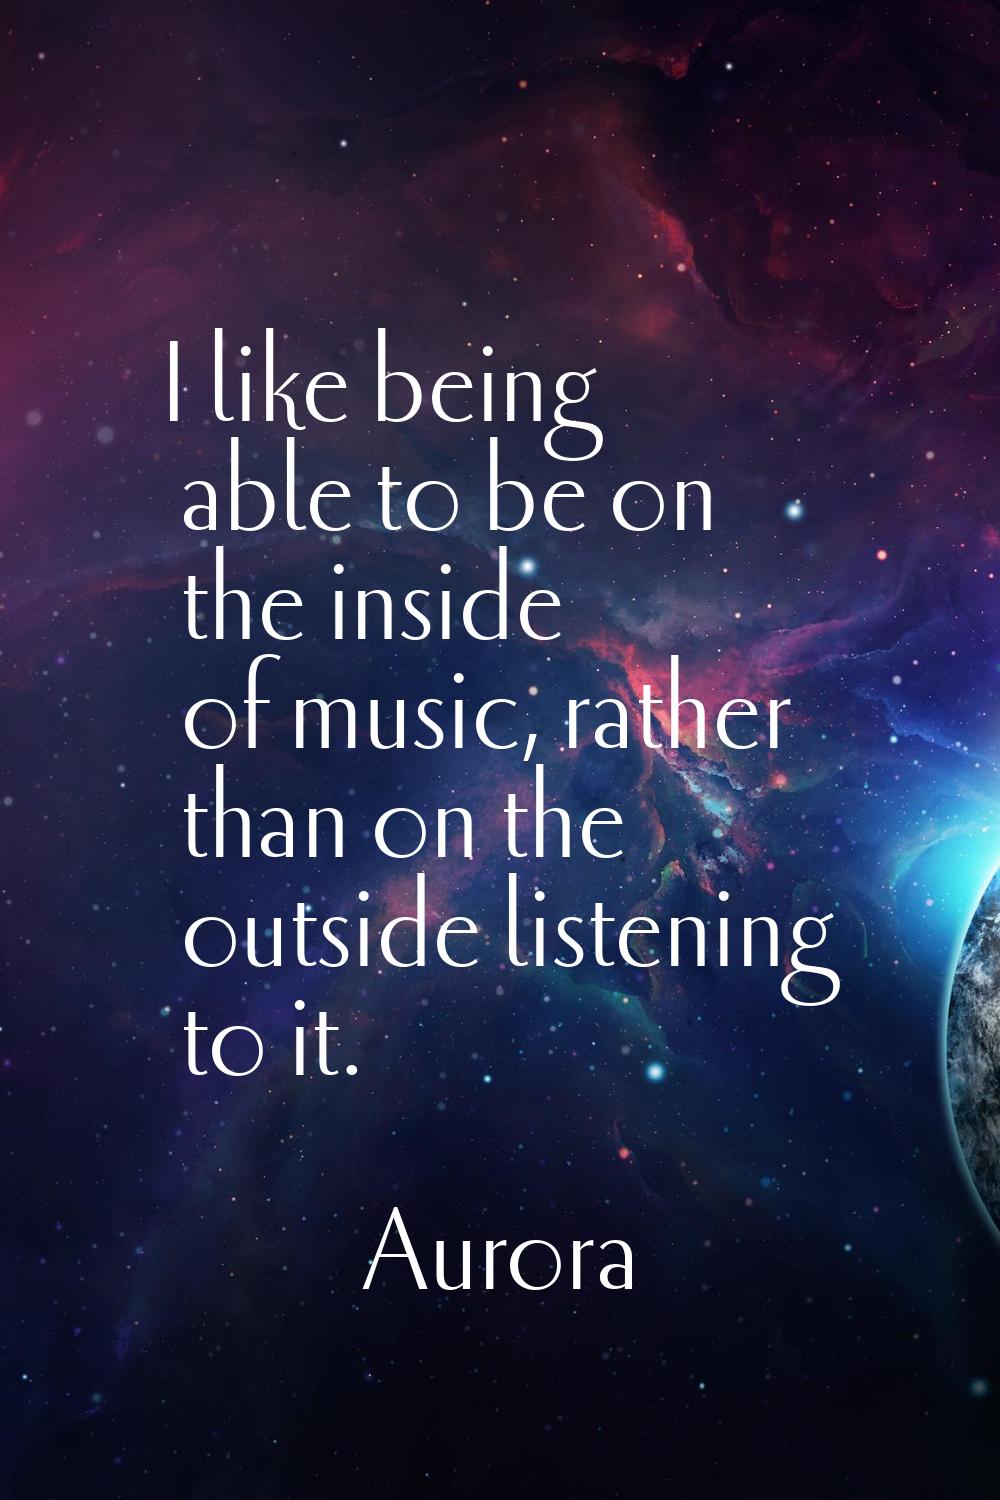 I like being able to be on the inside of music, rather than on the outside listening to it.